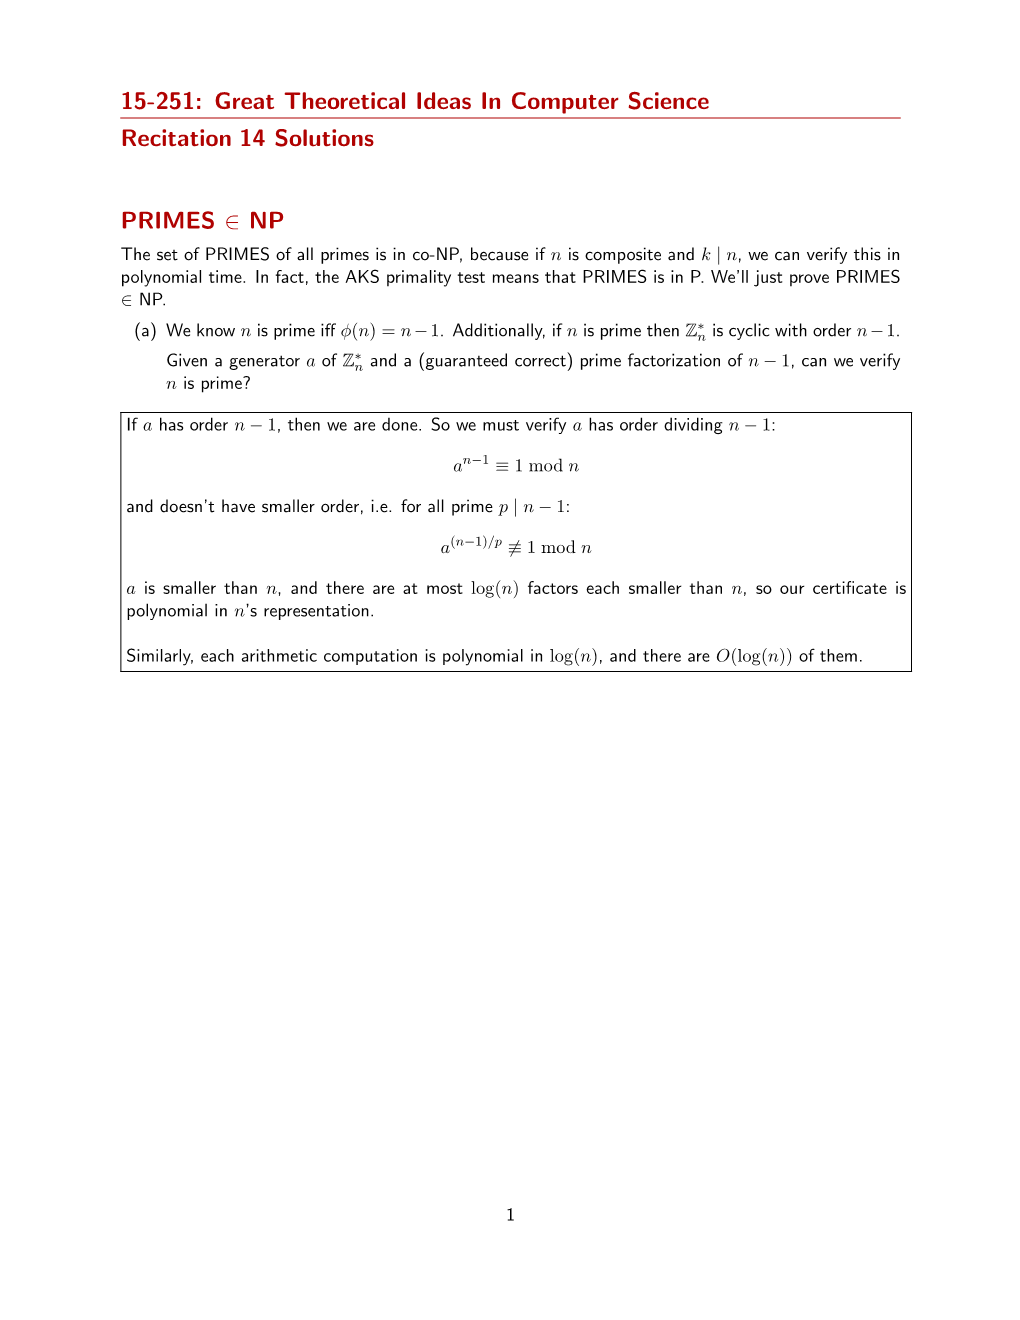 15-251: Great Theoretical Ideas in Computer Science Recitation 14 Solutions PRIMES ∈ NP